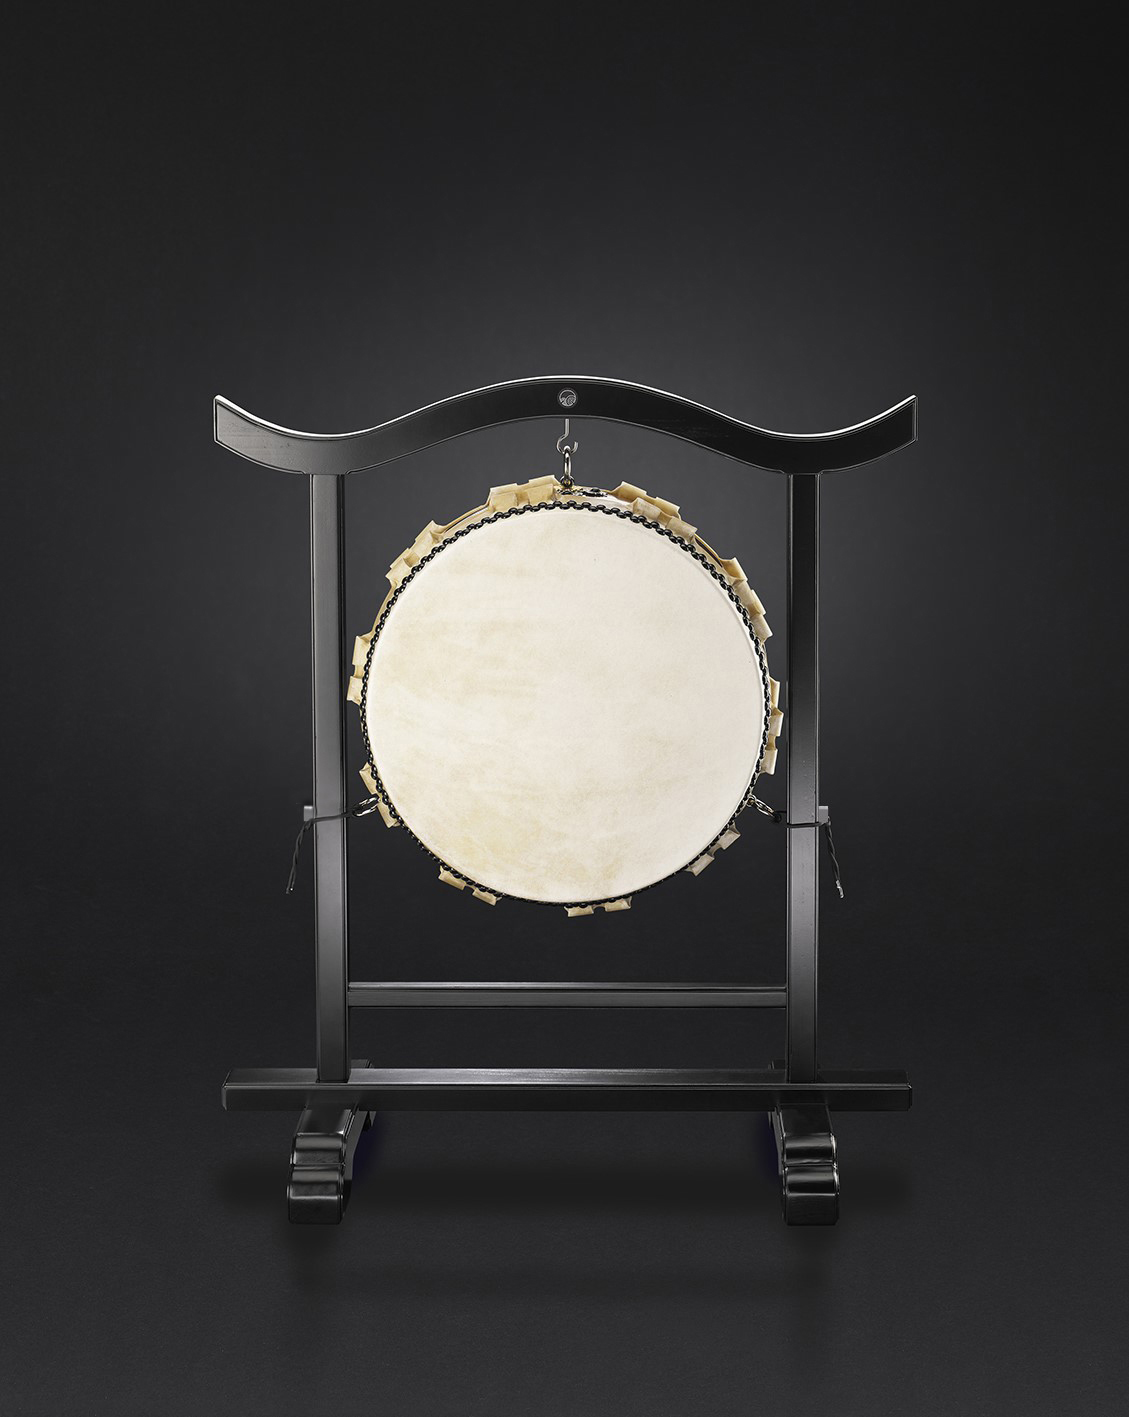 Hira-Daiko temple stand for Ø48cm  (295€)  